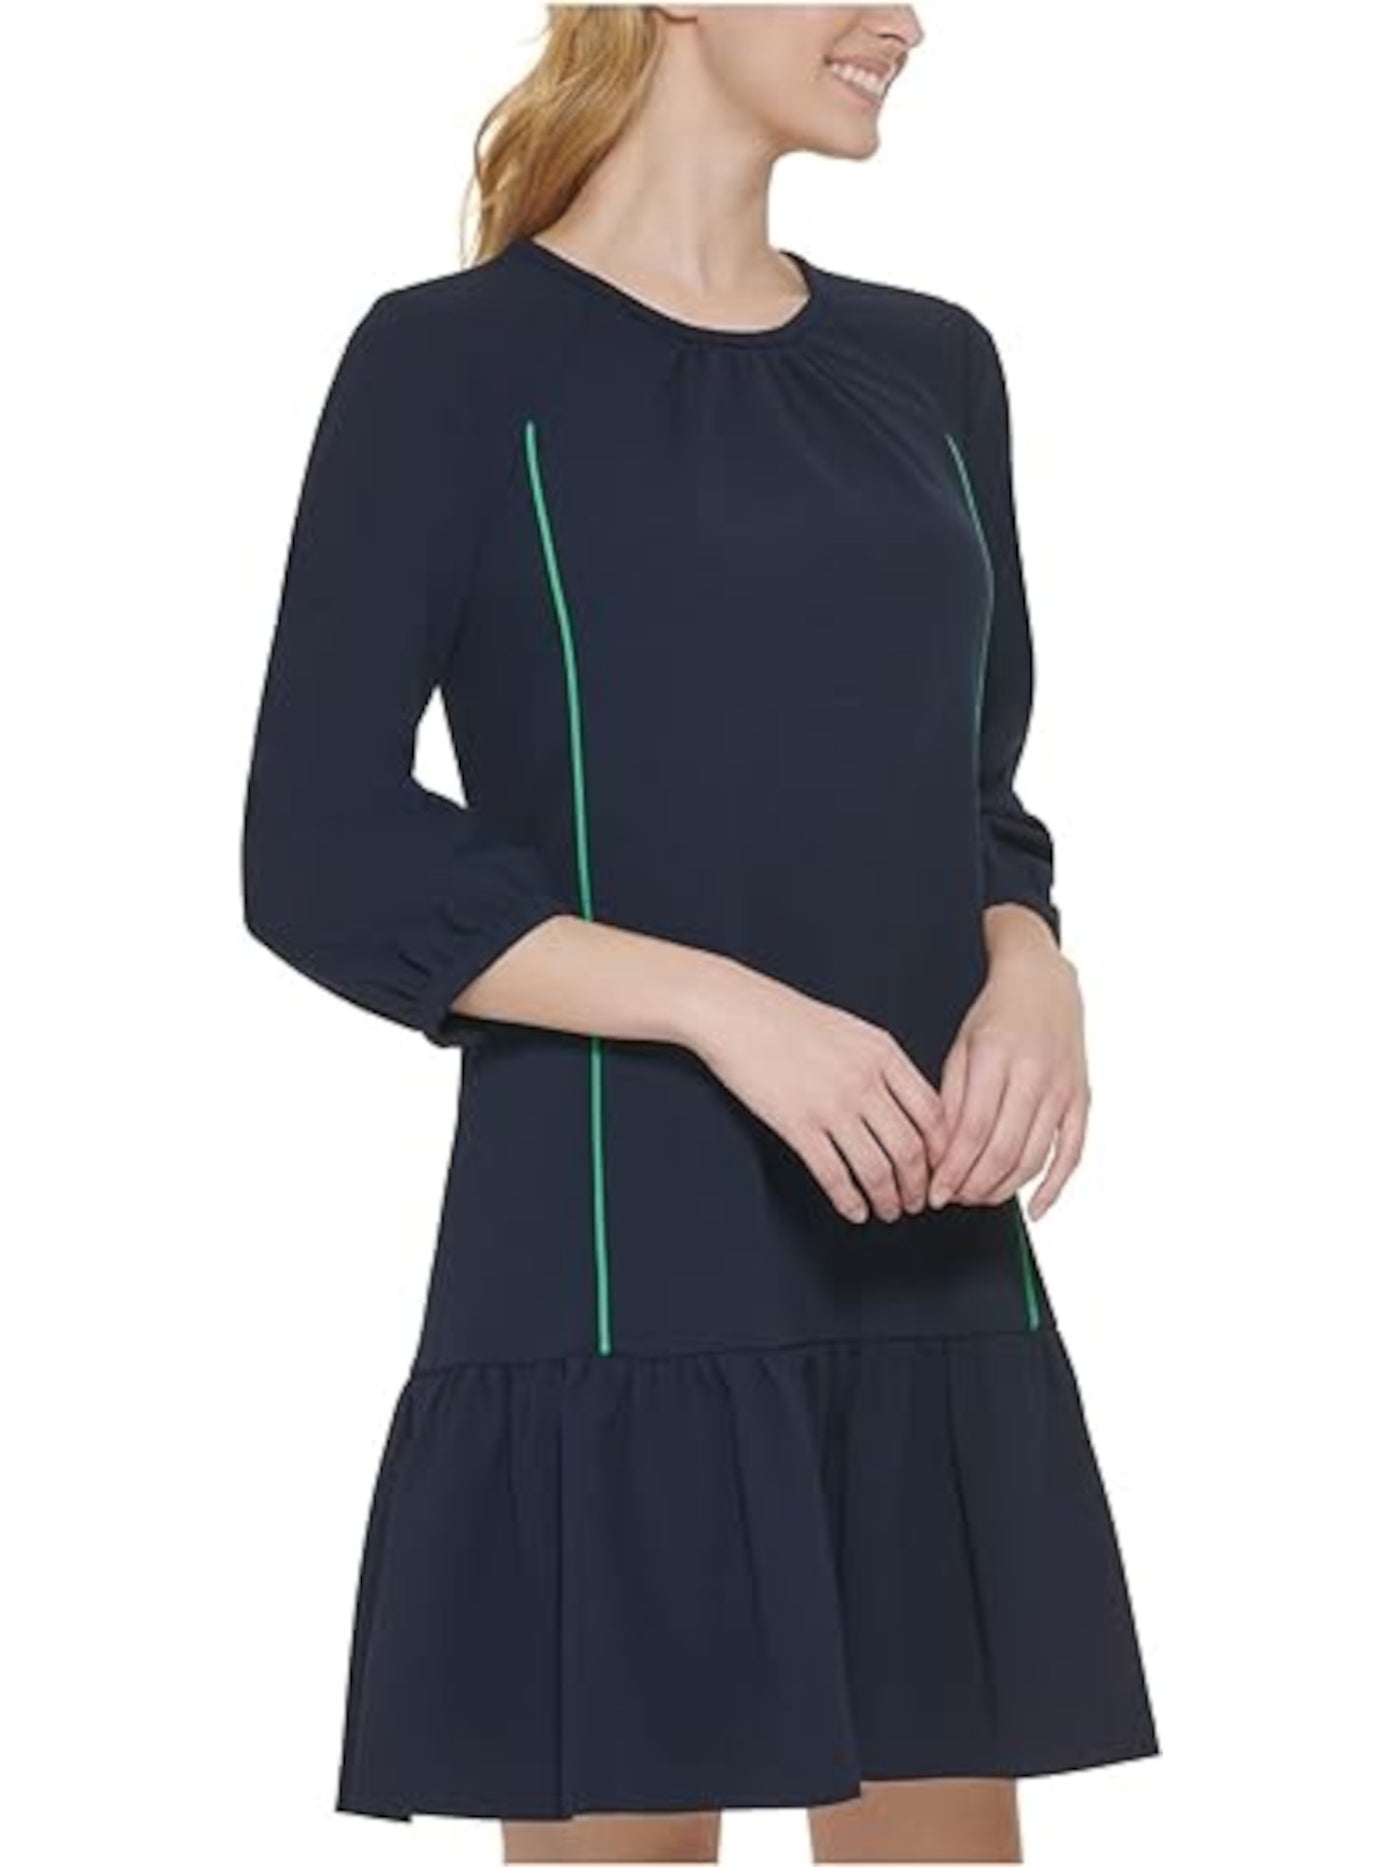 TOMMY HILFIGER Womens Navy Zippered Ruffled Unlined Gathered 3/4 Sleeve Round Neck Above The Knee Wear To Work Fit + Flare Dress 10